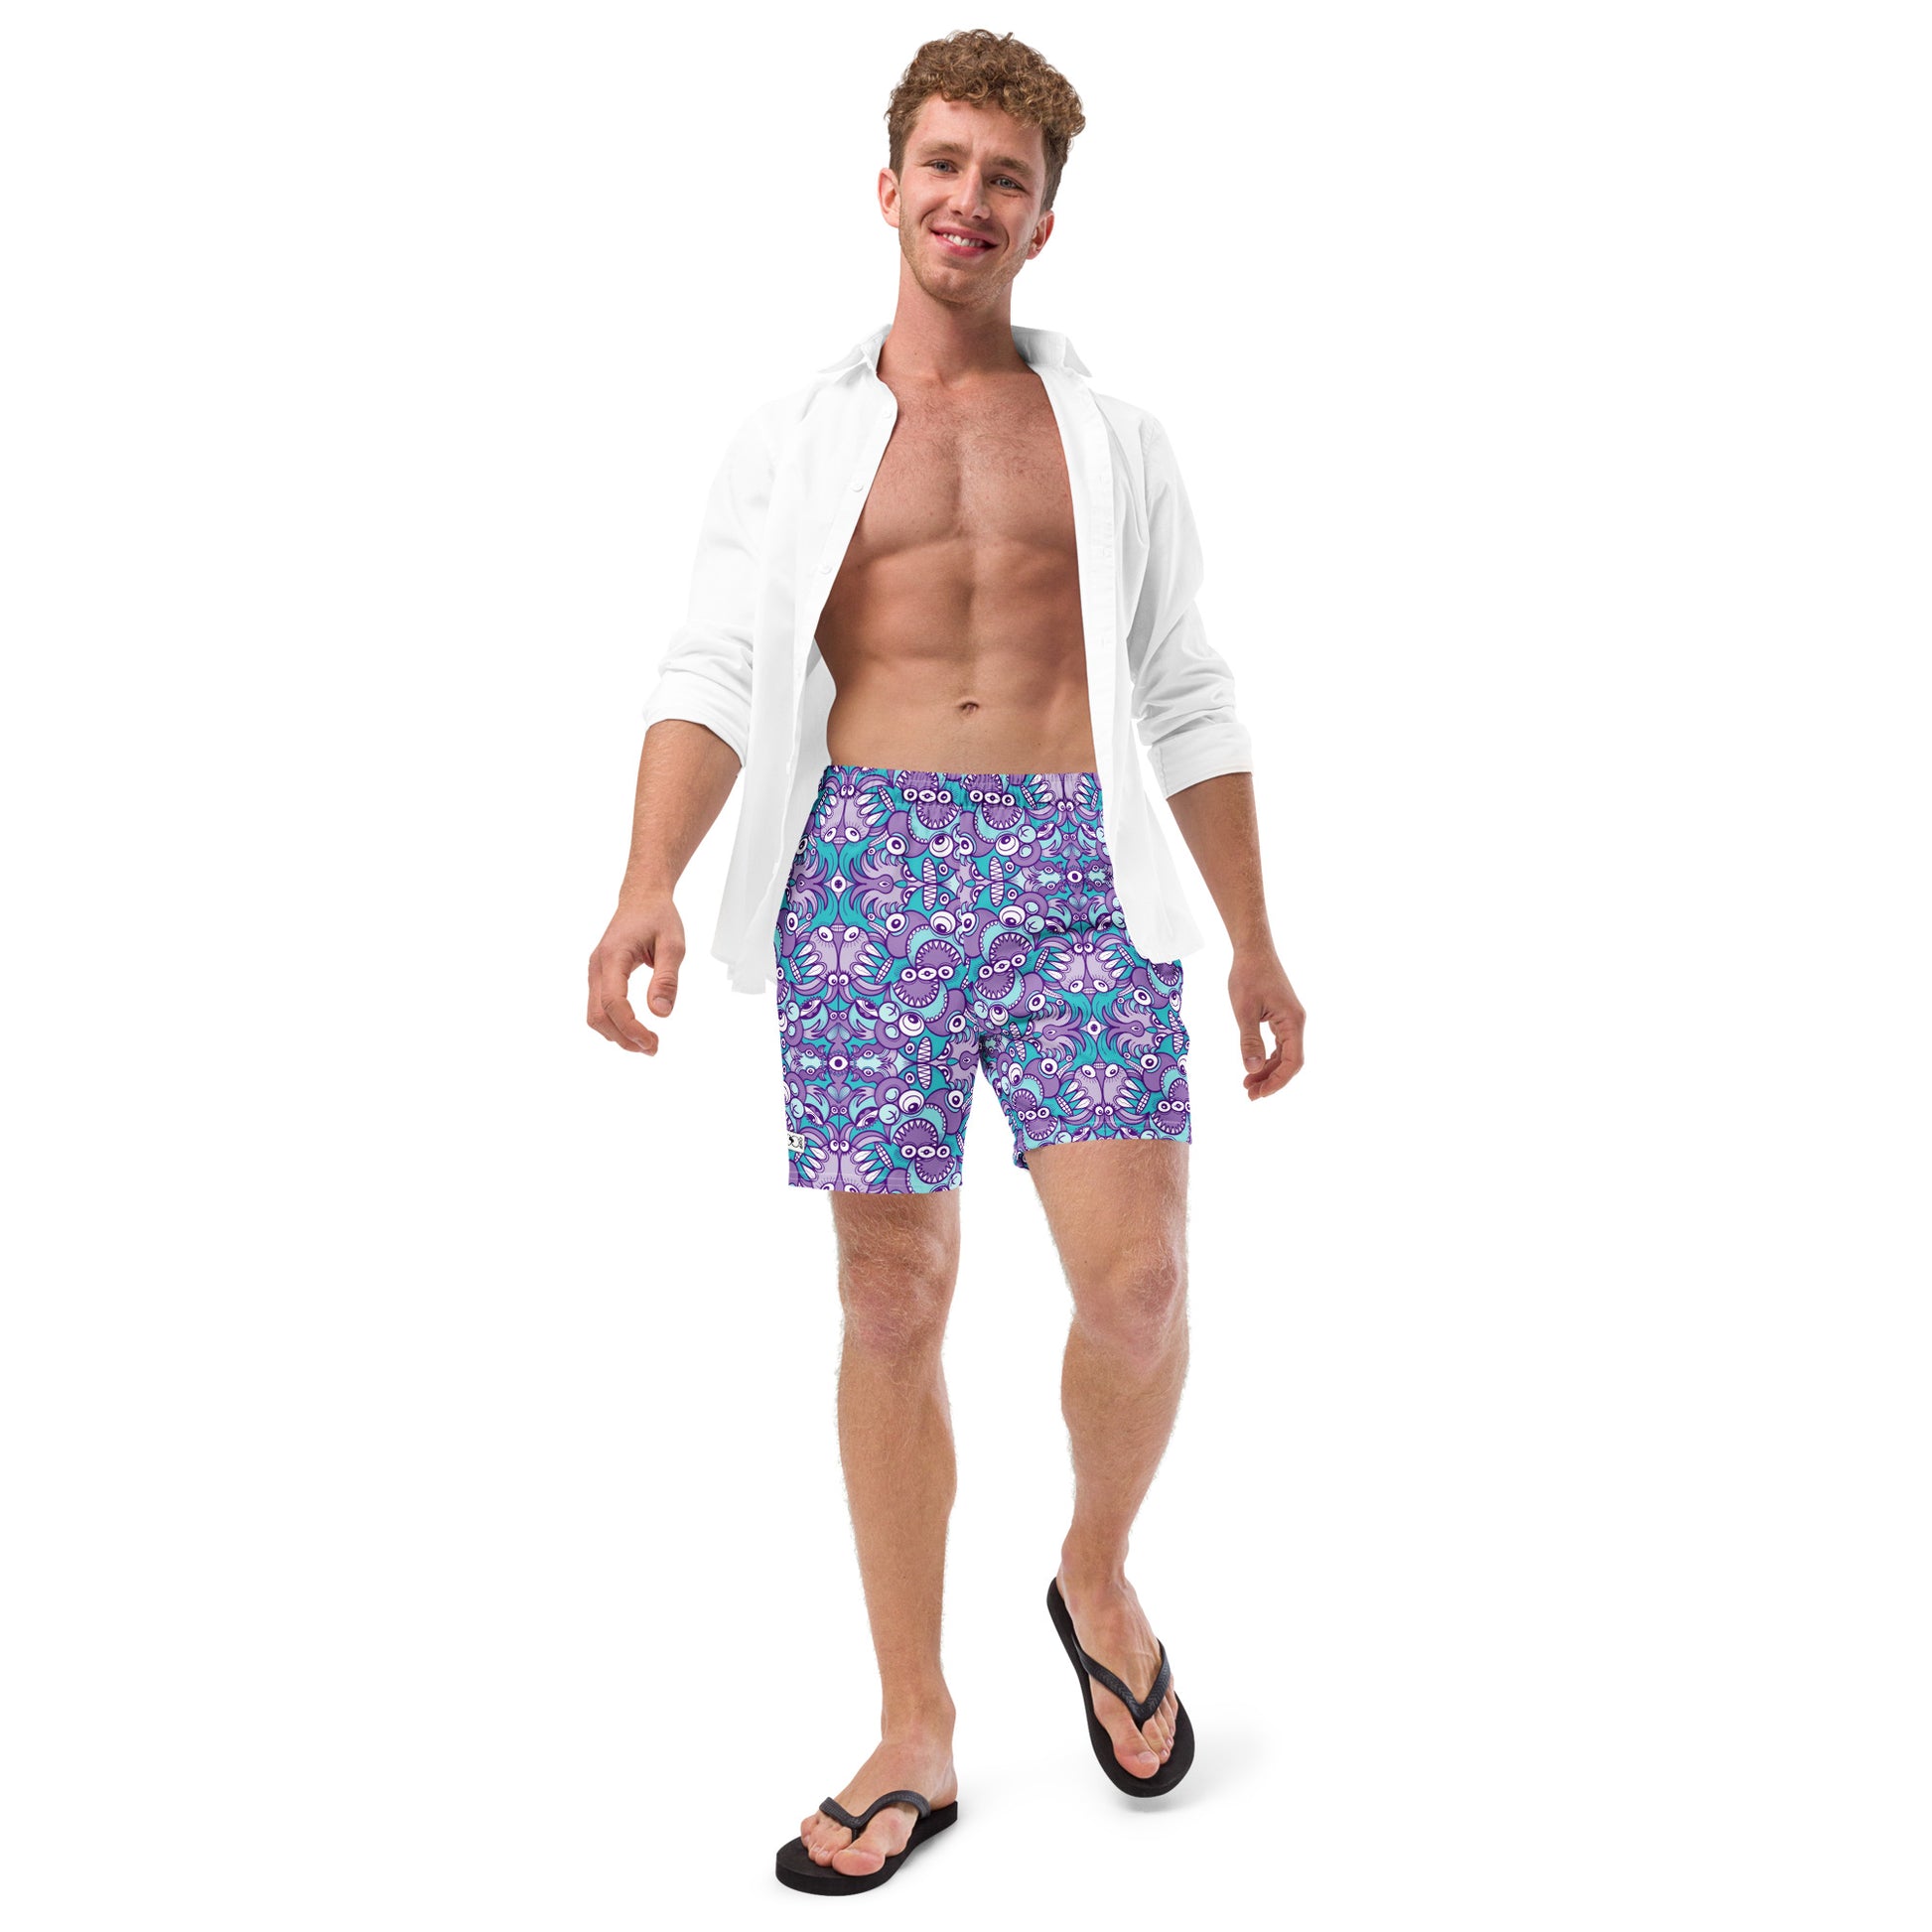 Planet 5: Aquatic Creatures from the Doodles of the Galaxy - Men's swim trunks. Lifestyle